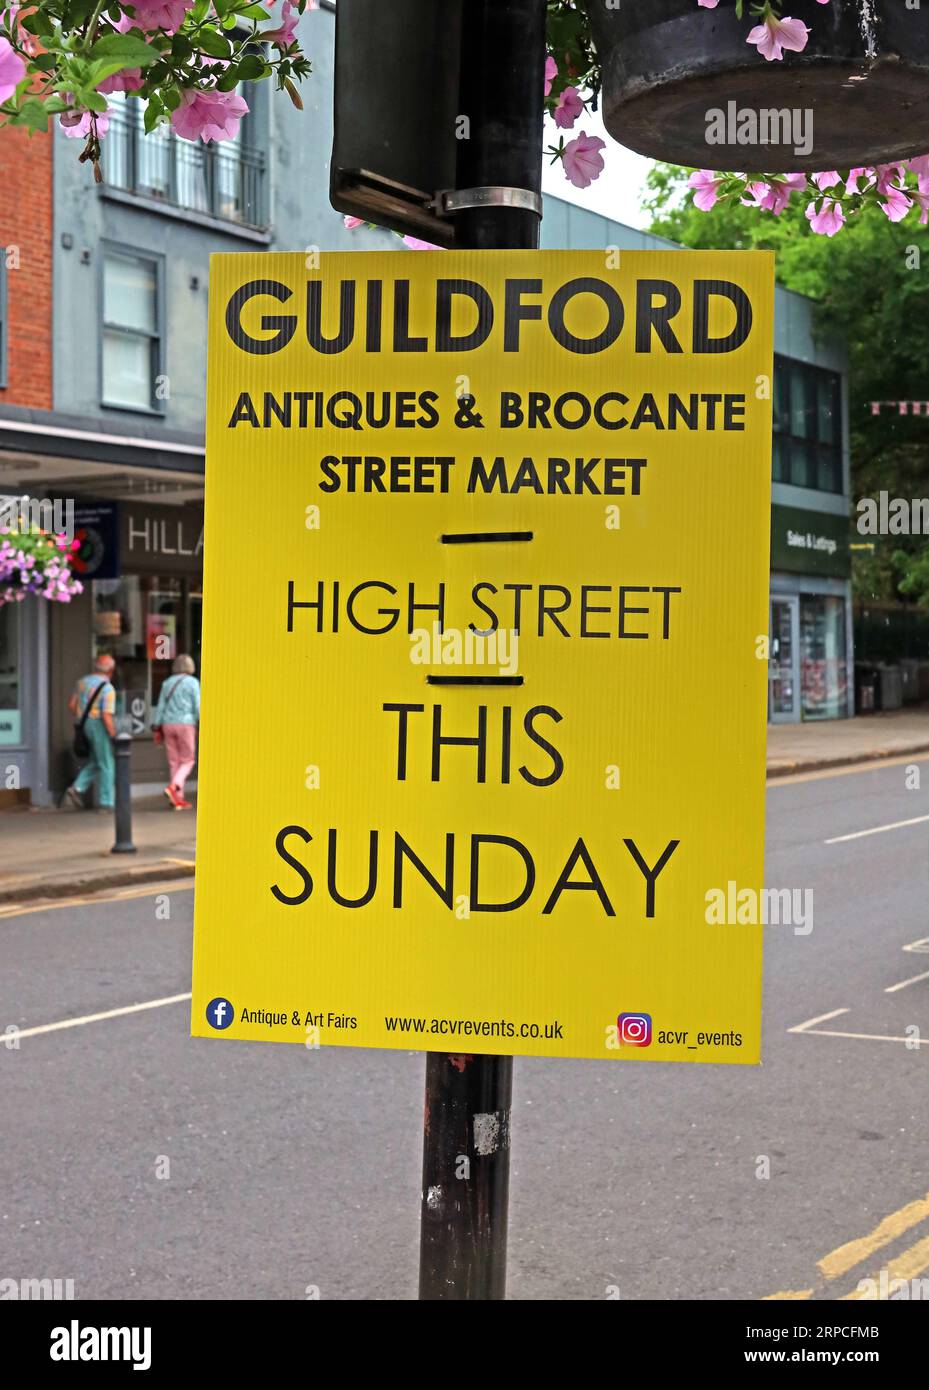 Guildford antiques & brocante street market sign, High Street this Sunday, Surrey, England, UK, GU1 3YL Stock Photo